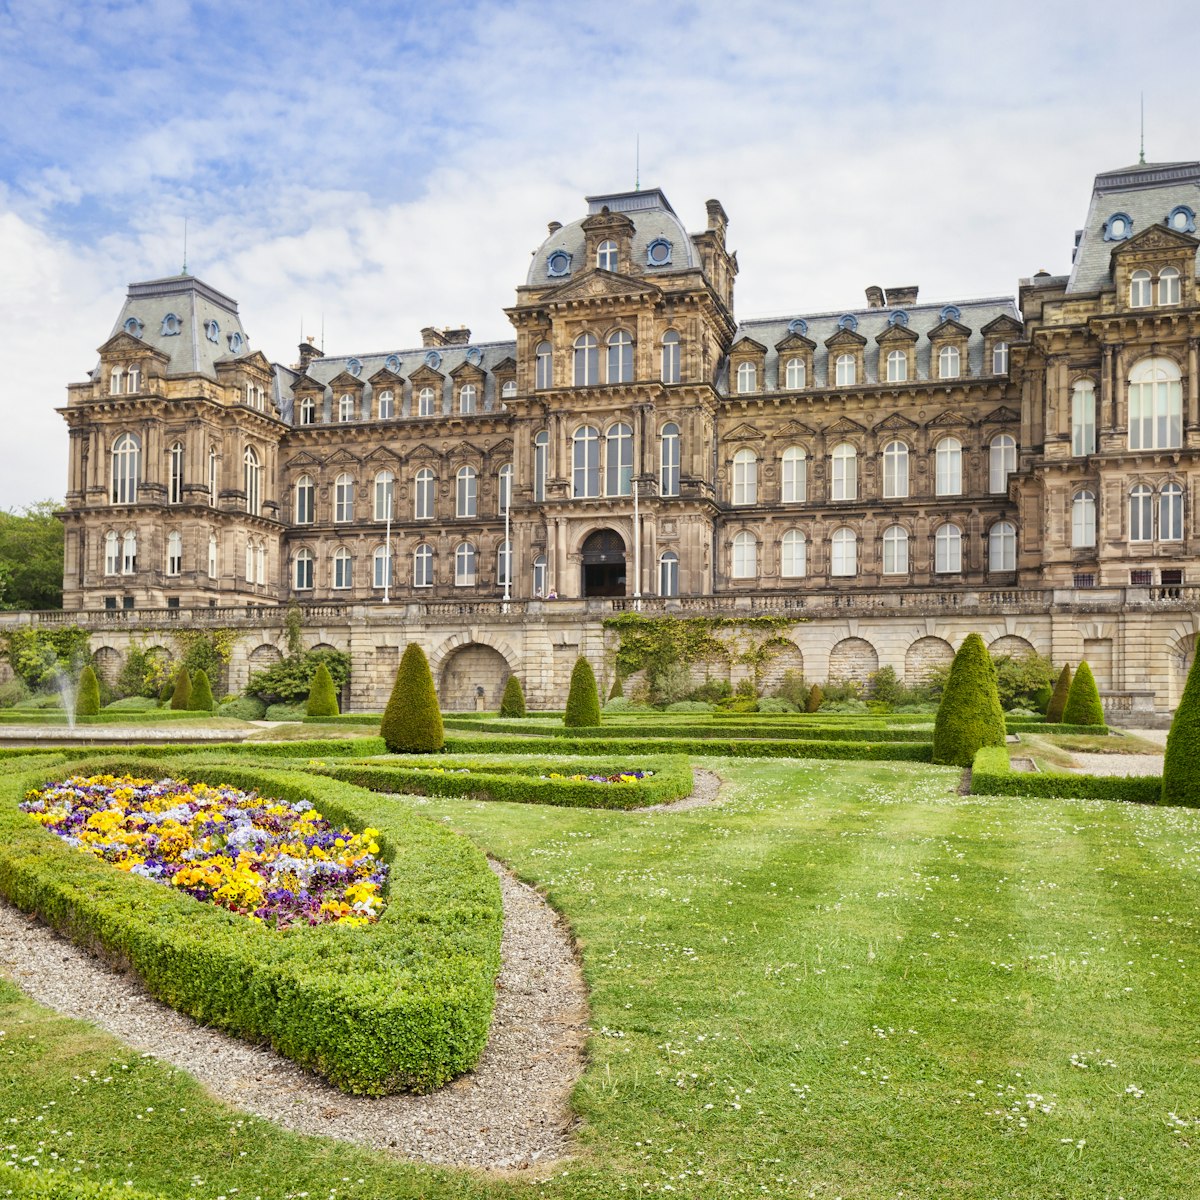 27 May 2017: Barnard Castle, Teesdale, County Durham - The Bowes Museum.  The museum owns a famous and renowned art collection and is built in a French style.; Shutterstock ID 657436690; your: Claire Naylor; gl: 65050; netsuite: Online ed; full: County Durham
657436690